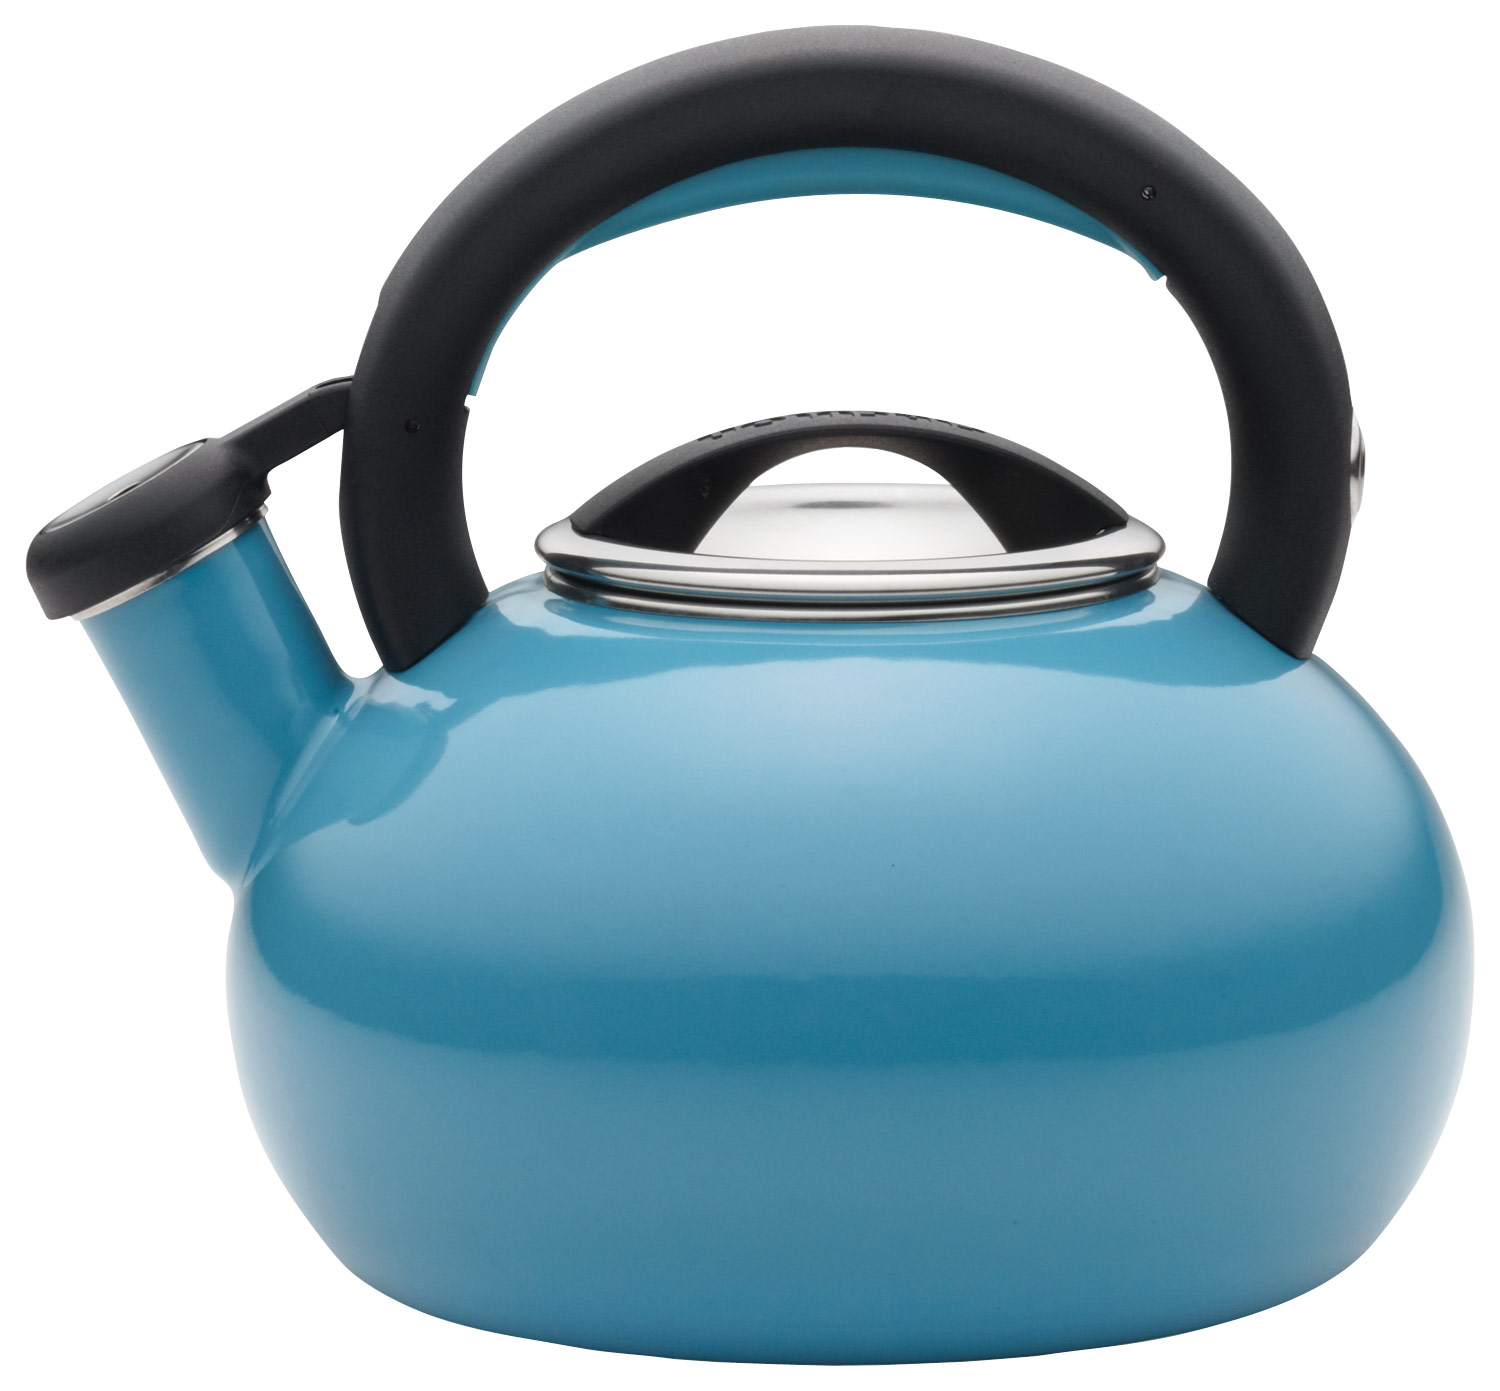 Sold at Auction: EMW Turquoise Mini Tea Kettle